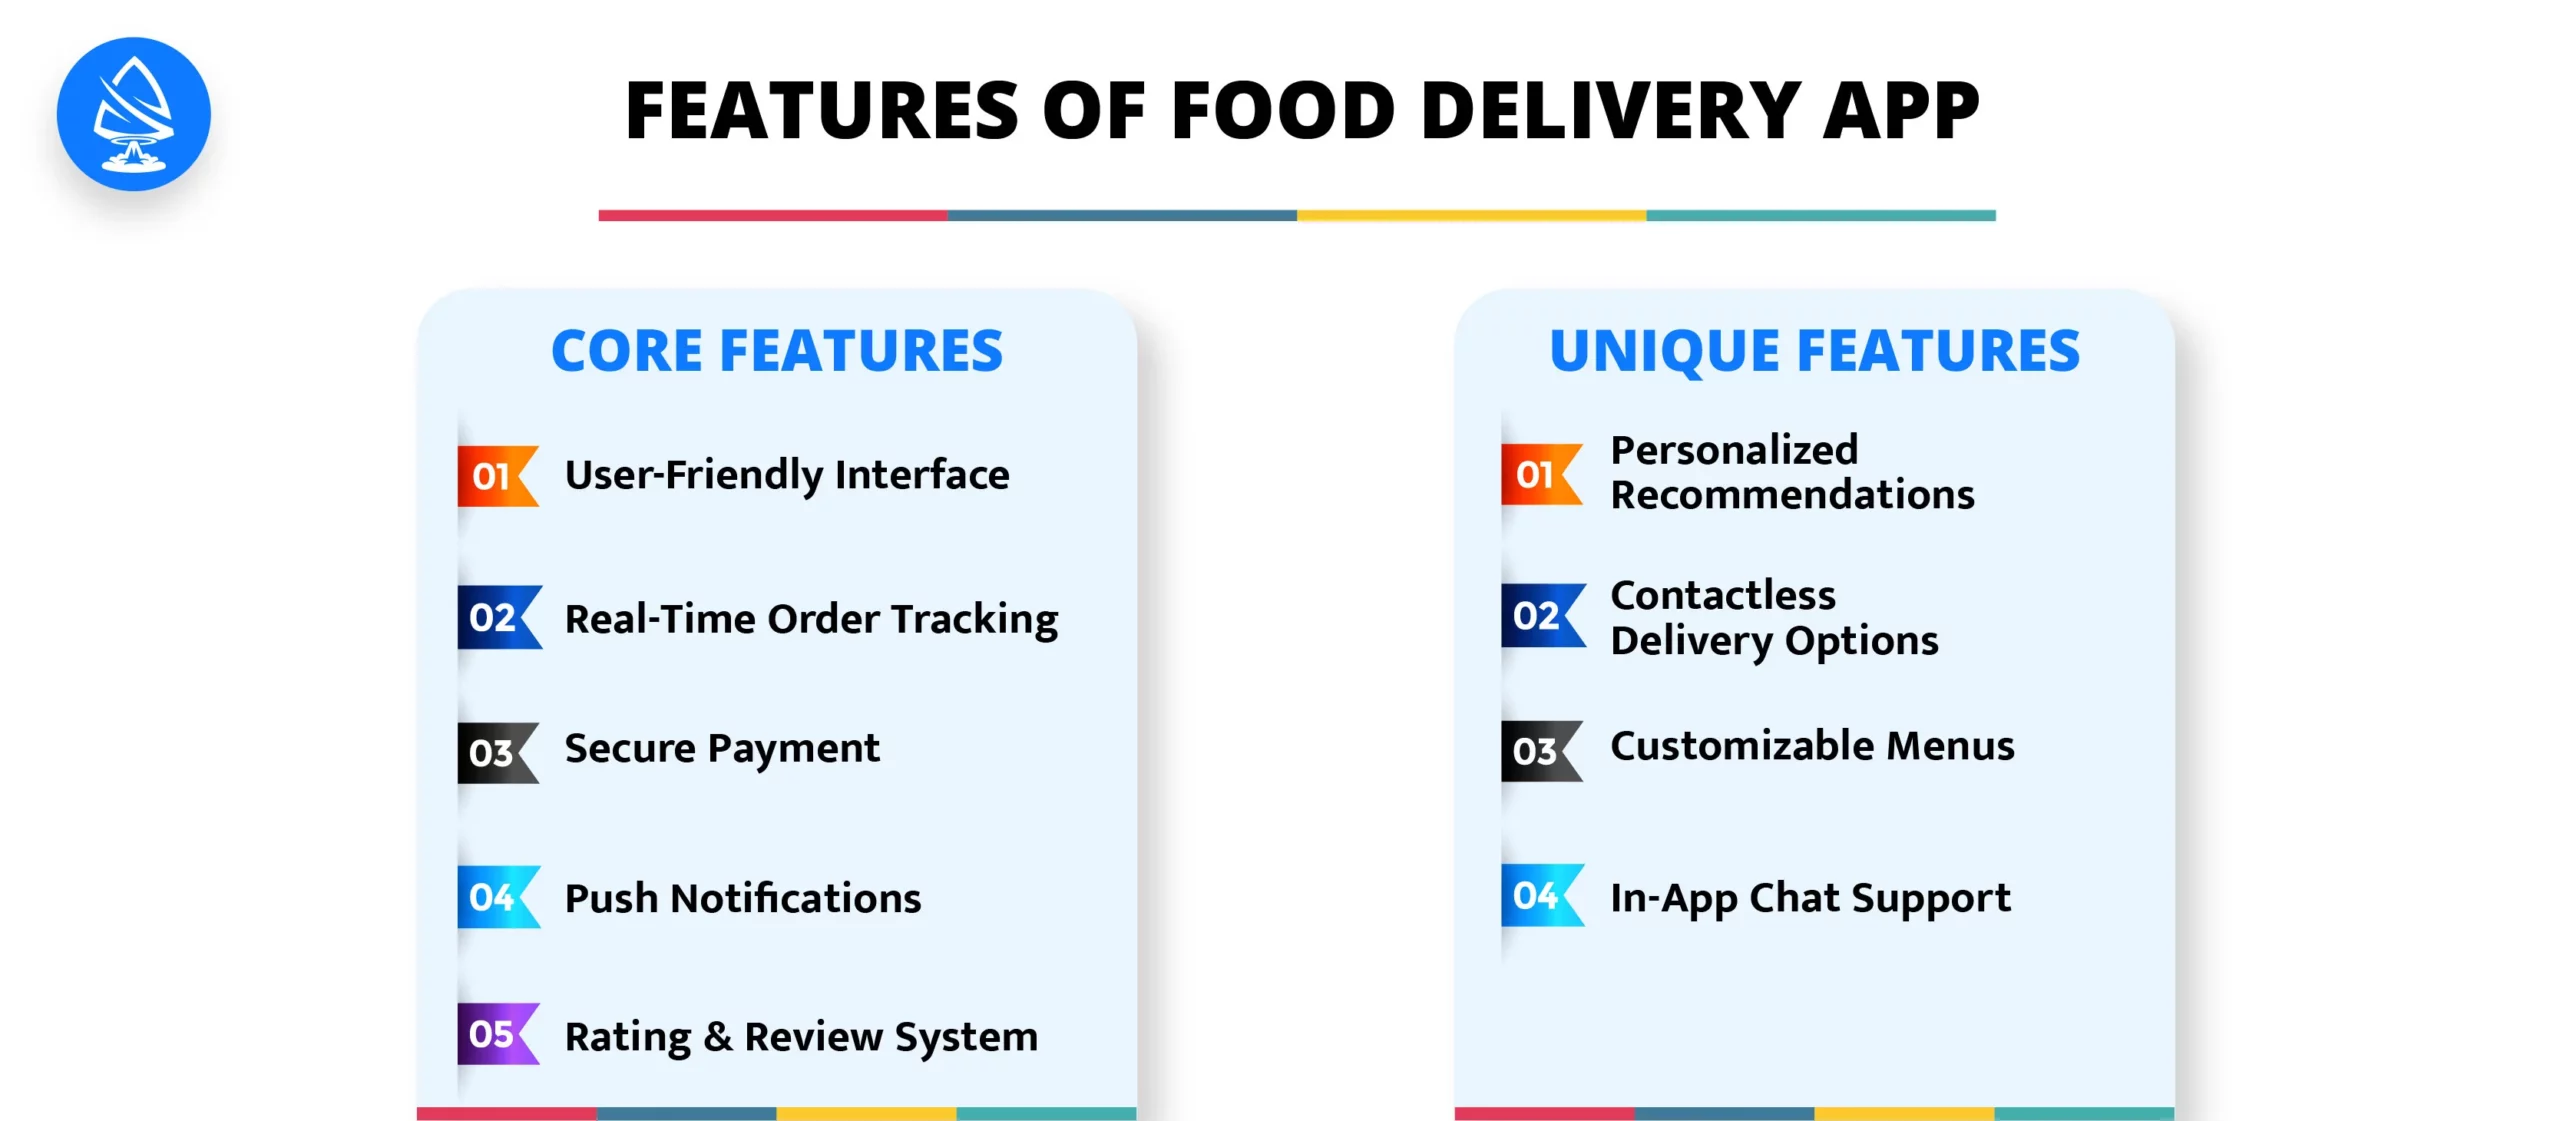 Features of Food Delivery App 